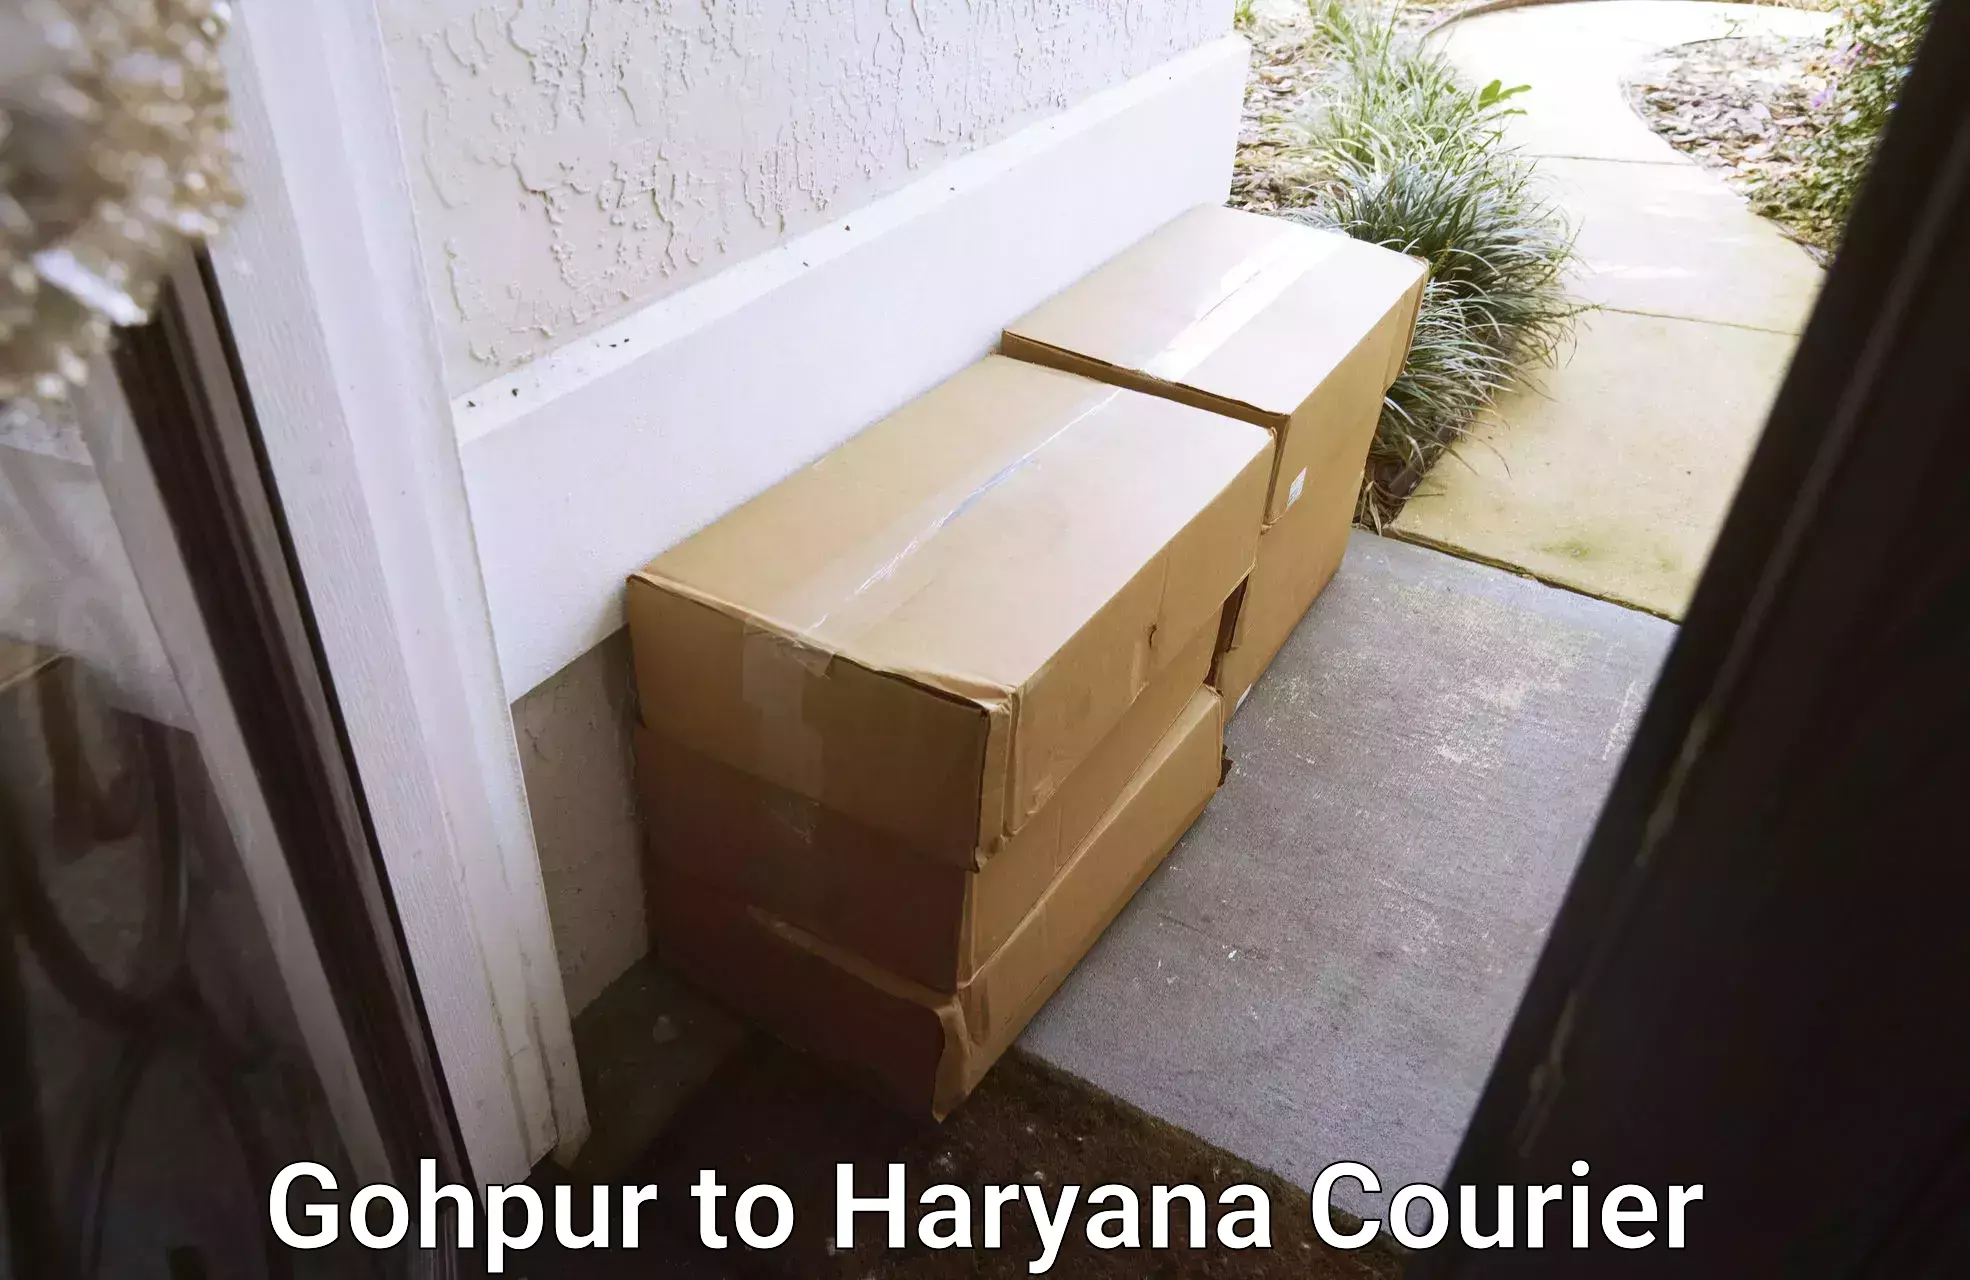 Easy access courier services in Gohpur to Nuh